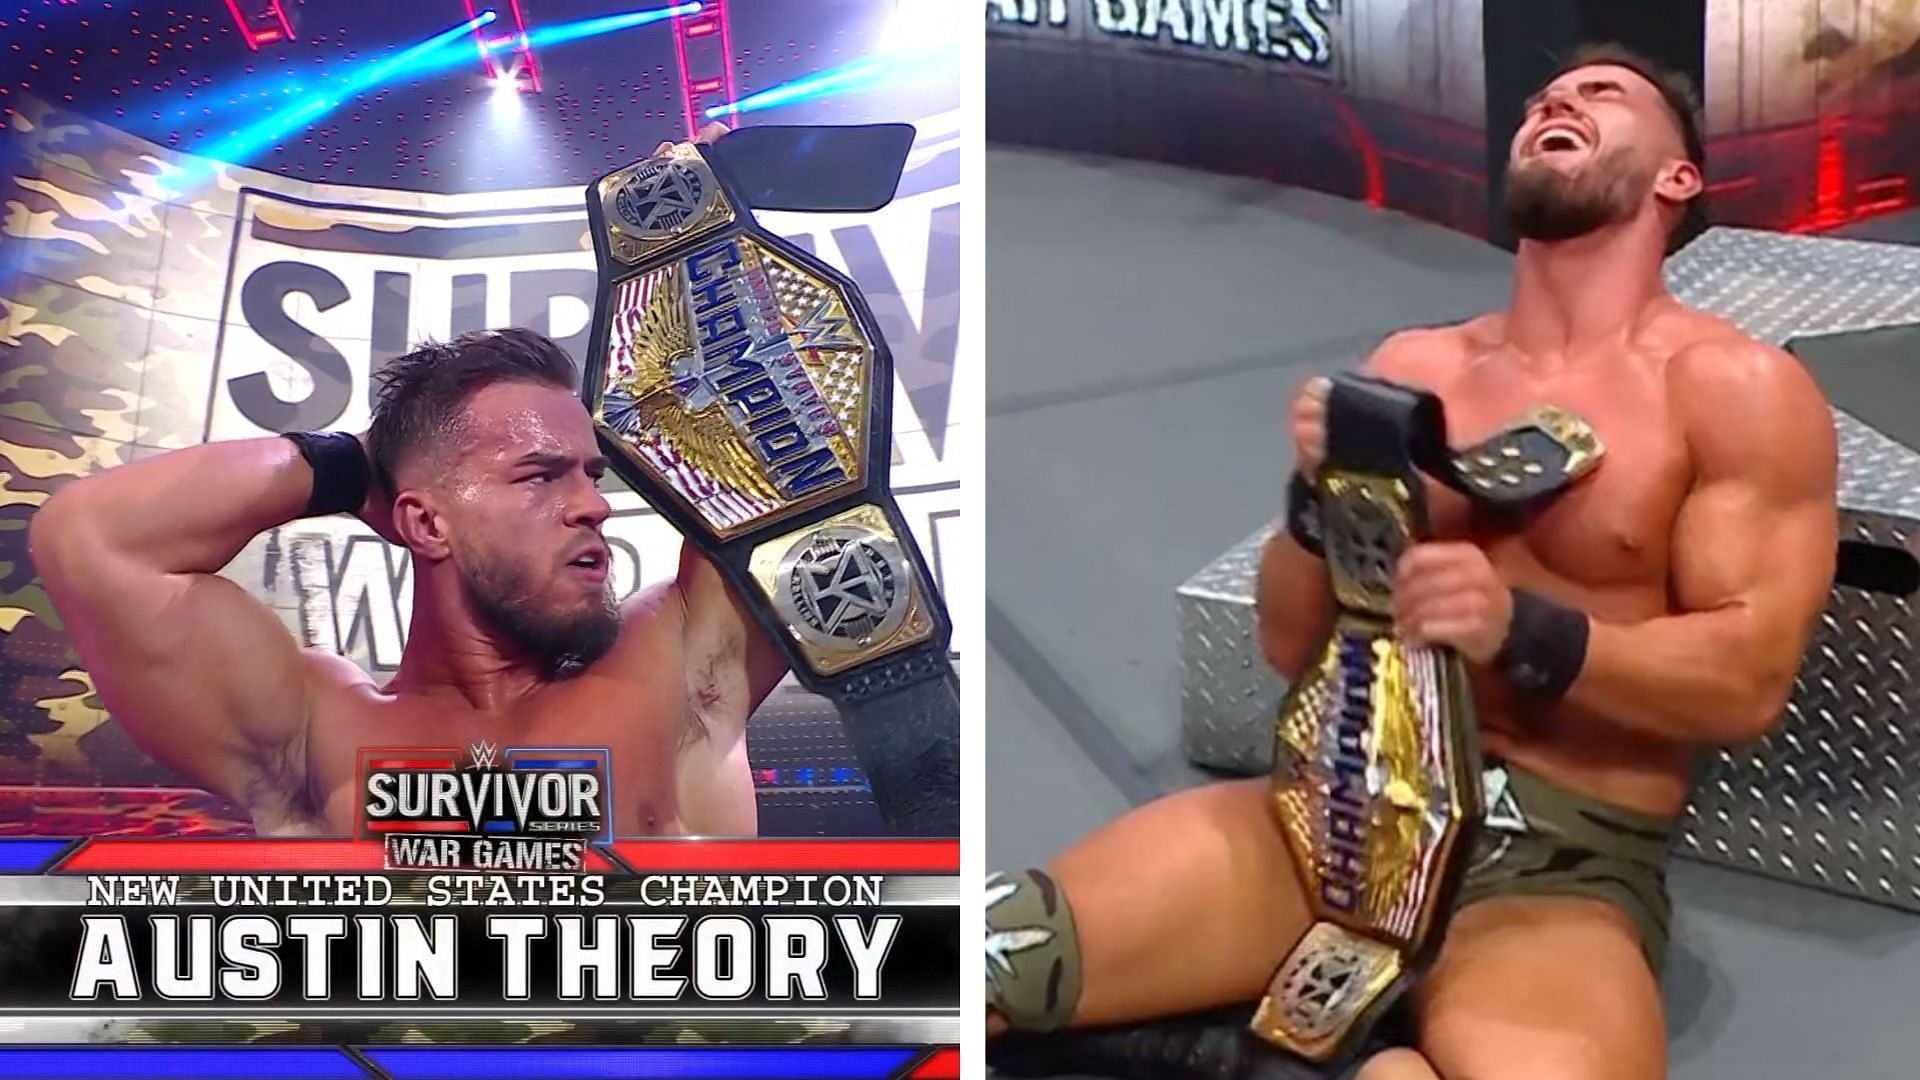 Austin Theory captured the United States Championship at WWE Survivor Series WarGames